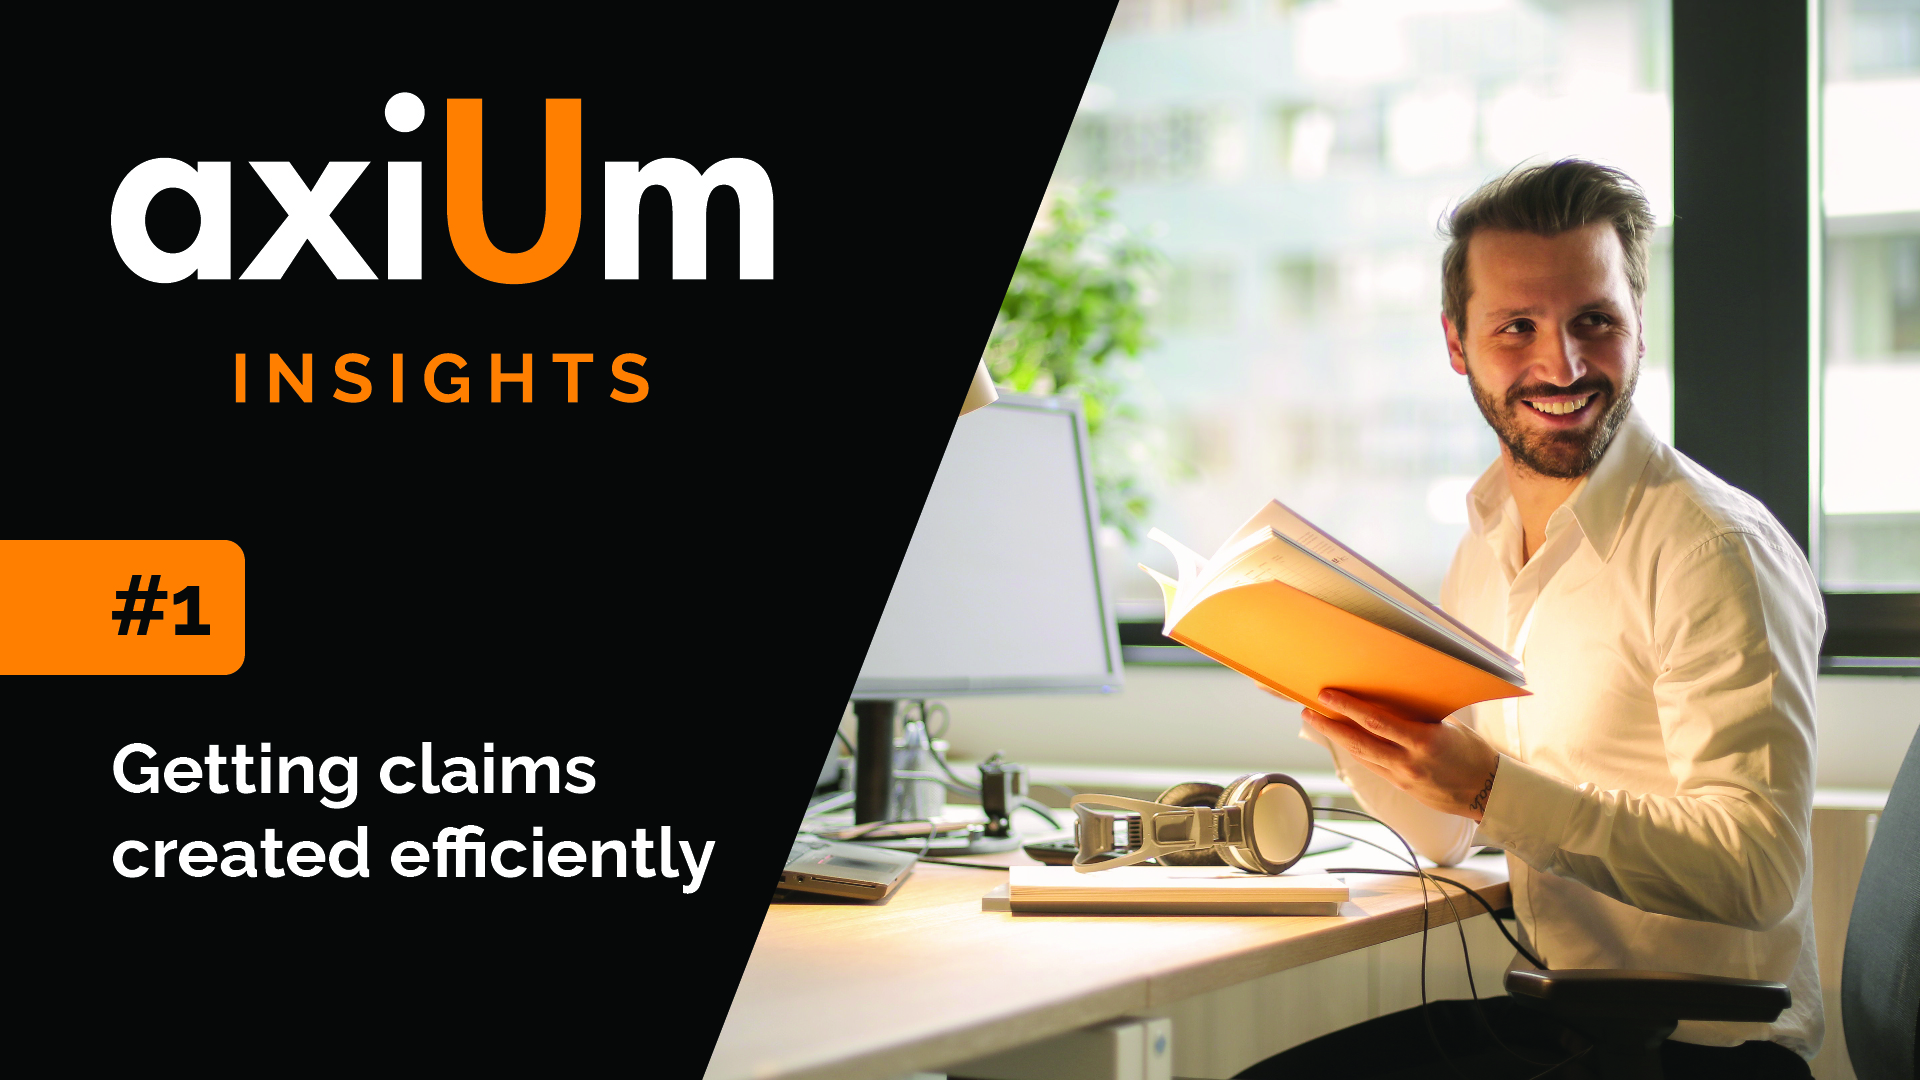 axiUm Insights #1: Getting claims created efficiently